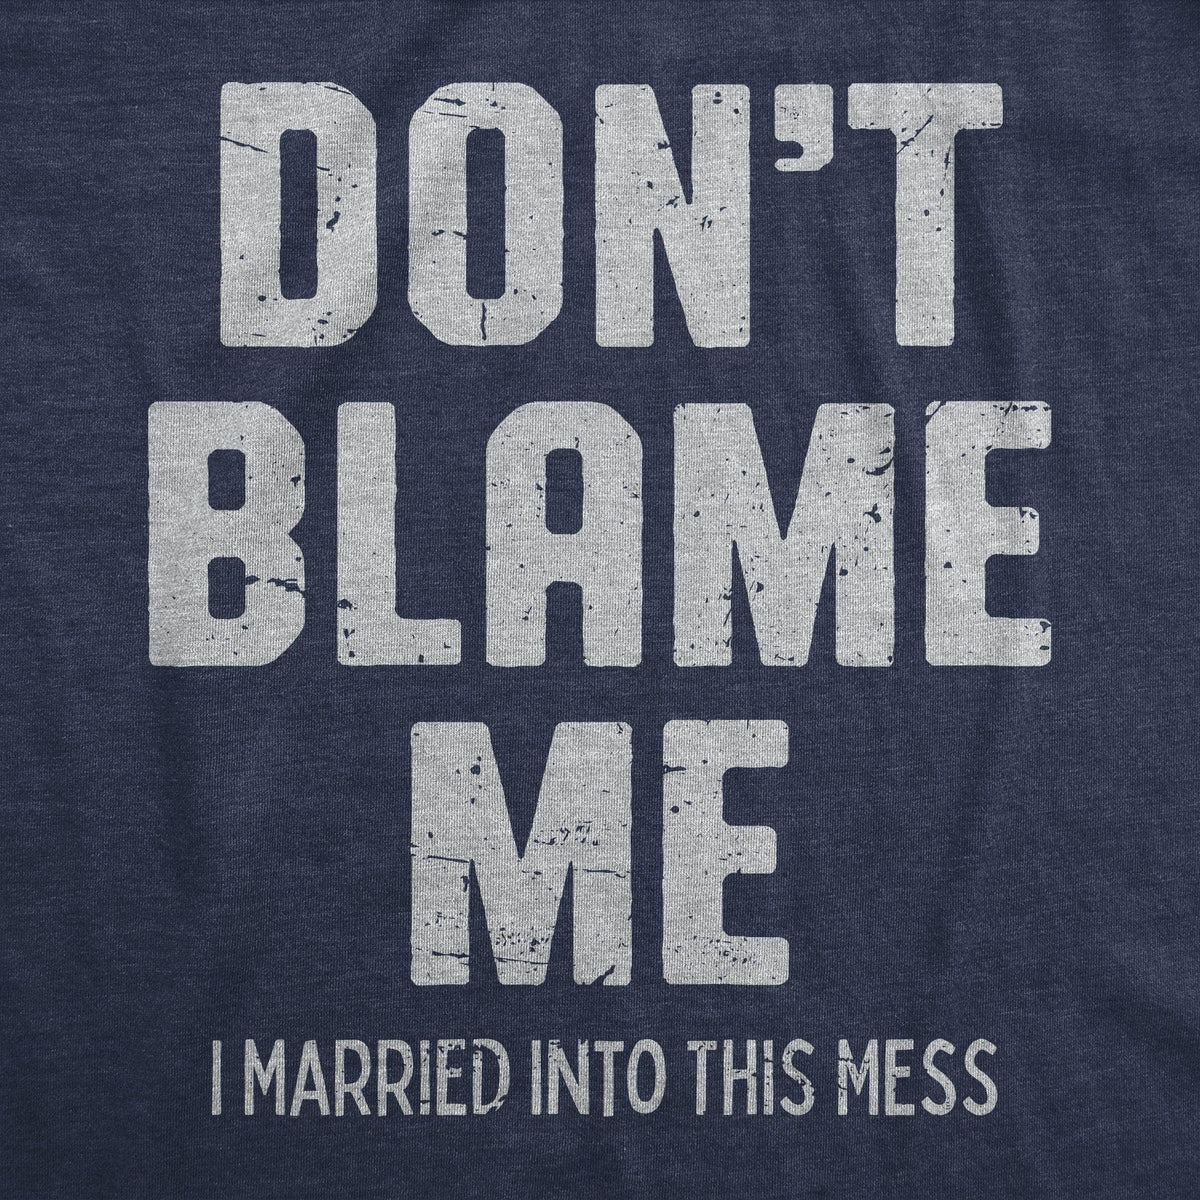 Dont Blame Me I Married Into This Mess Men&#39;s Tshirt  -  Crazy Dog T-Shirts